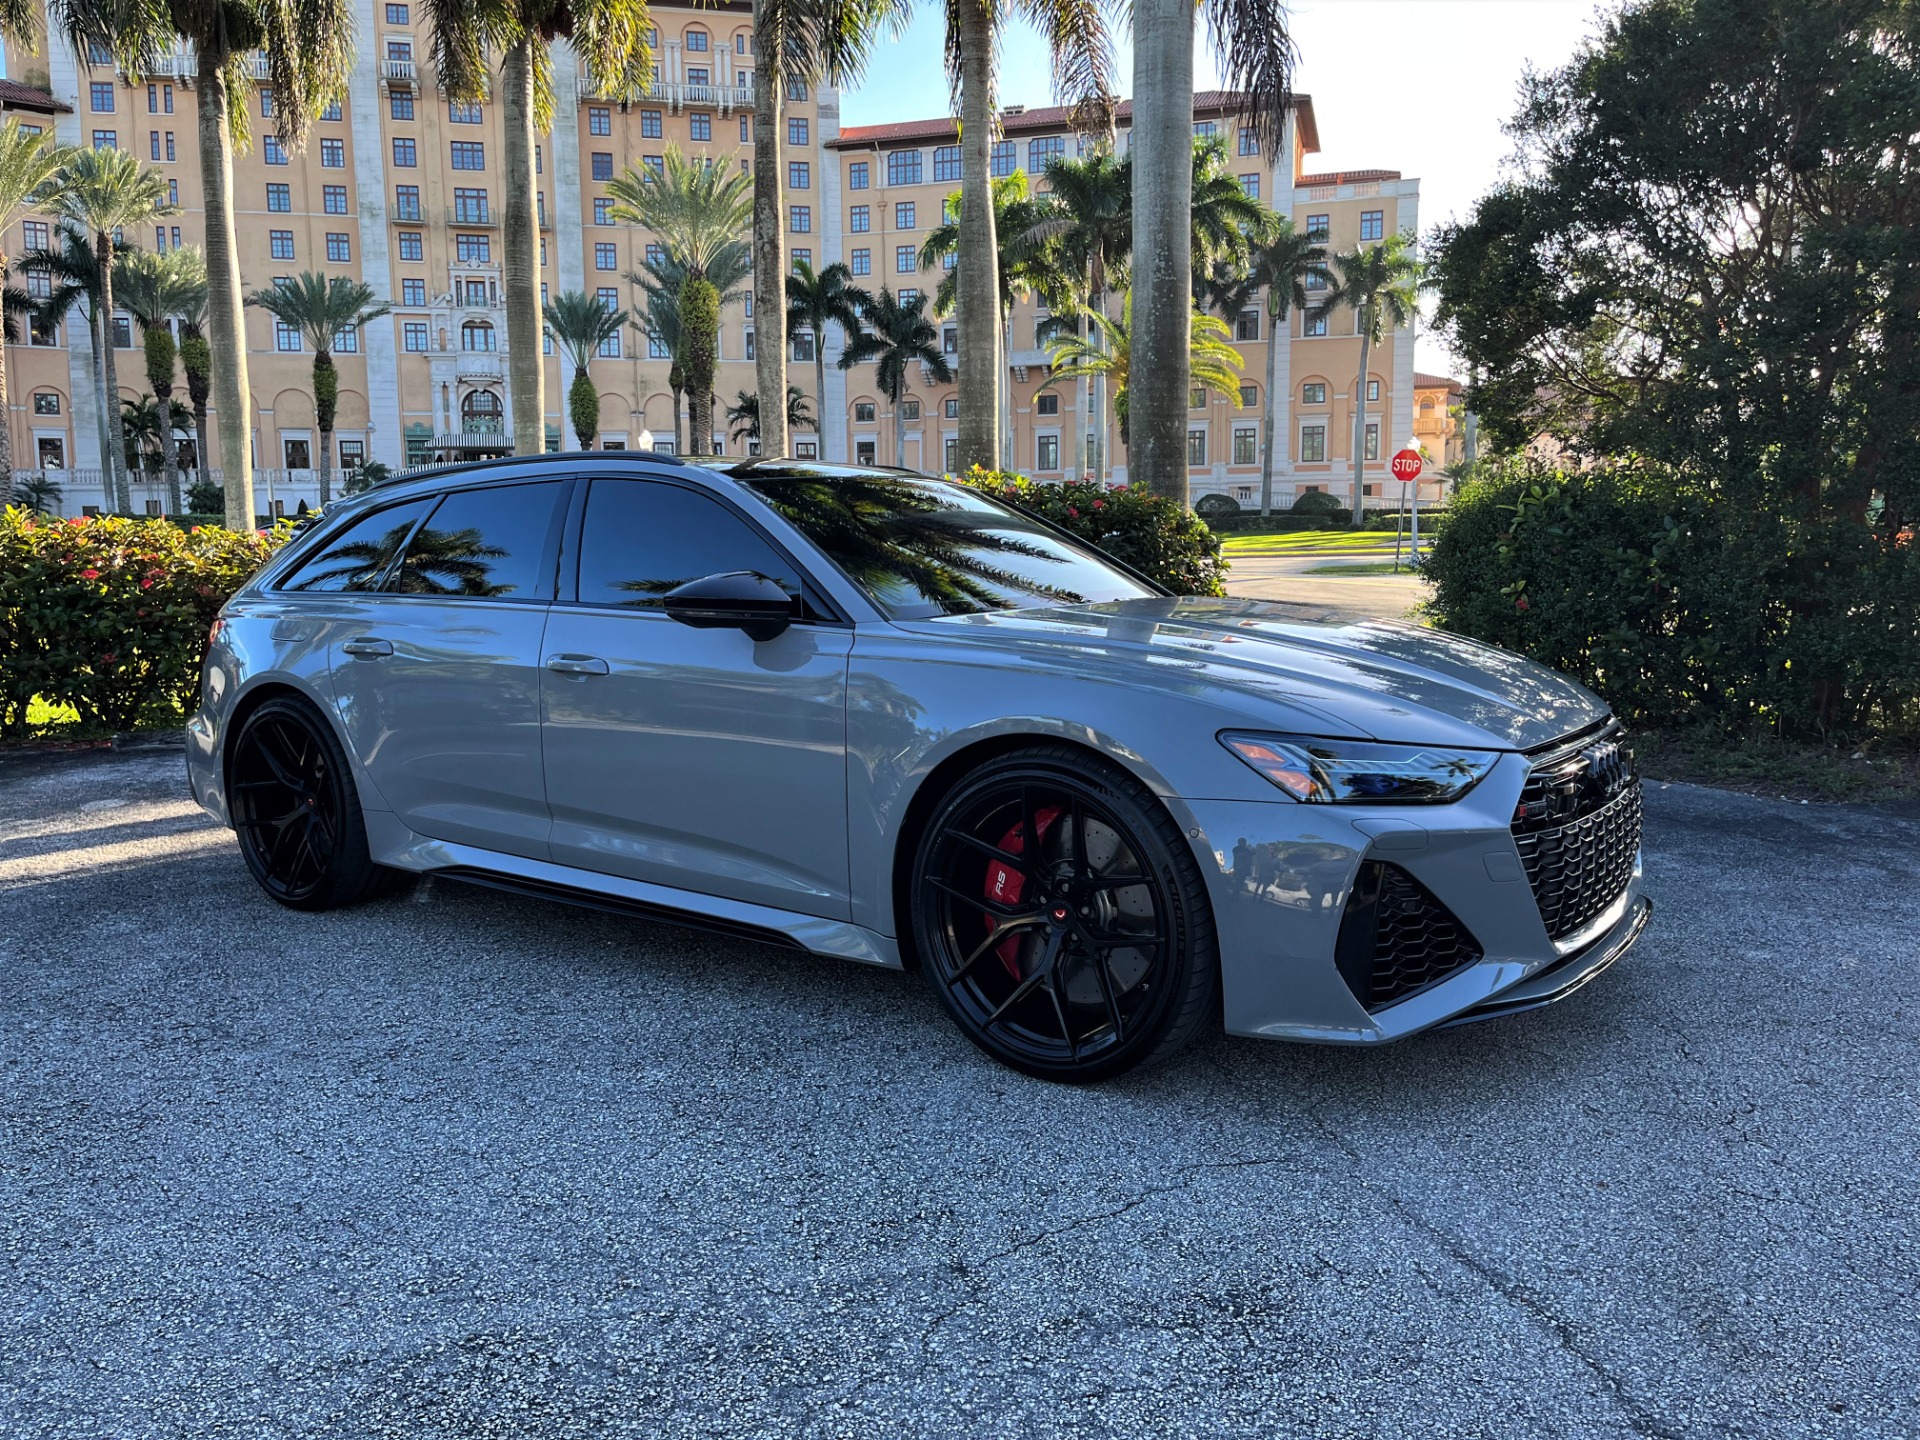 Used 2021 Audi RS 6 Avant 4.0T quattro Avant for sale $119,850 at The Gables Sports Cars in Miami FL 33146 2